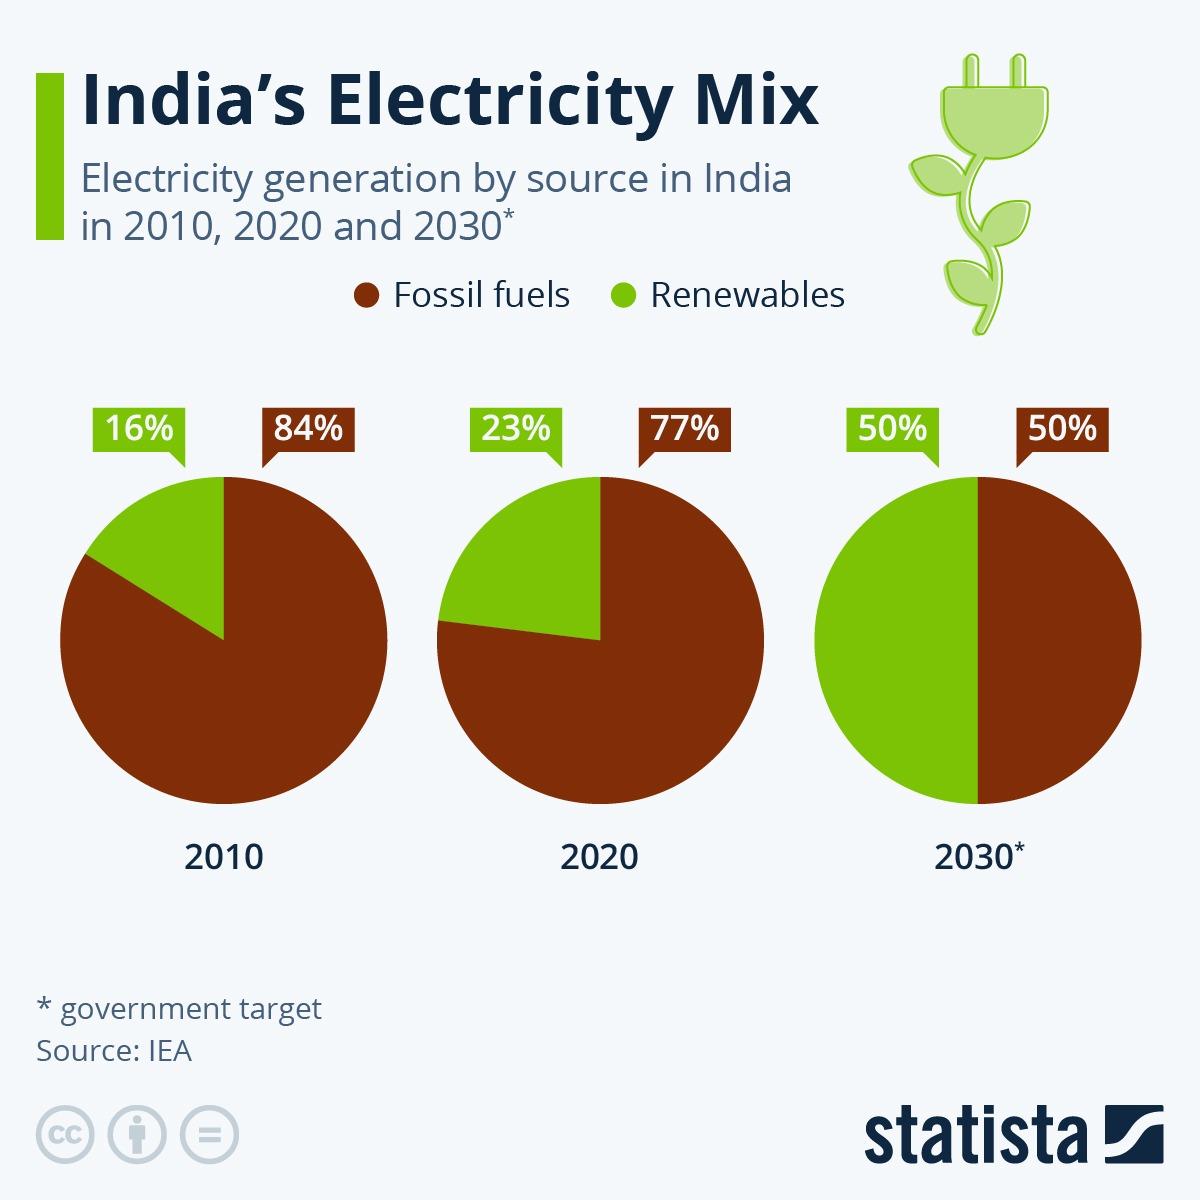 What Percentage of India's Electricity Is Produced by Renewable Resources?